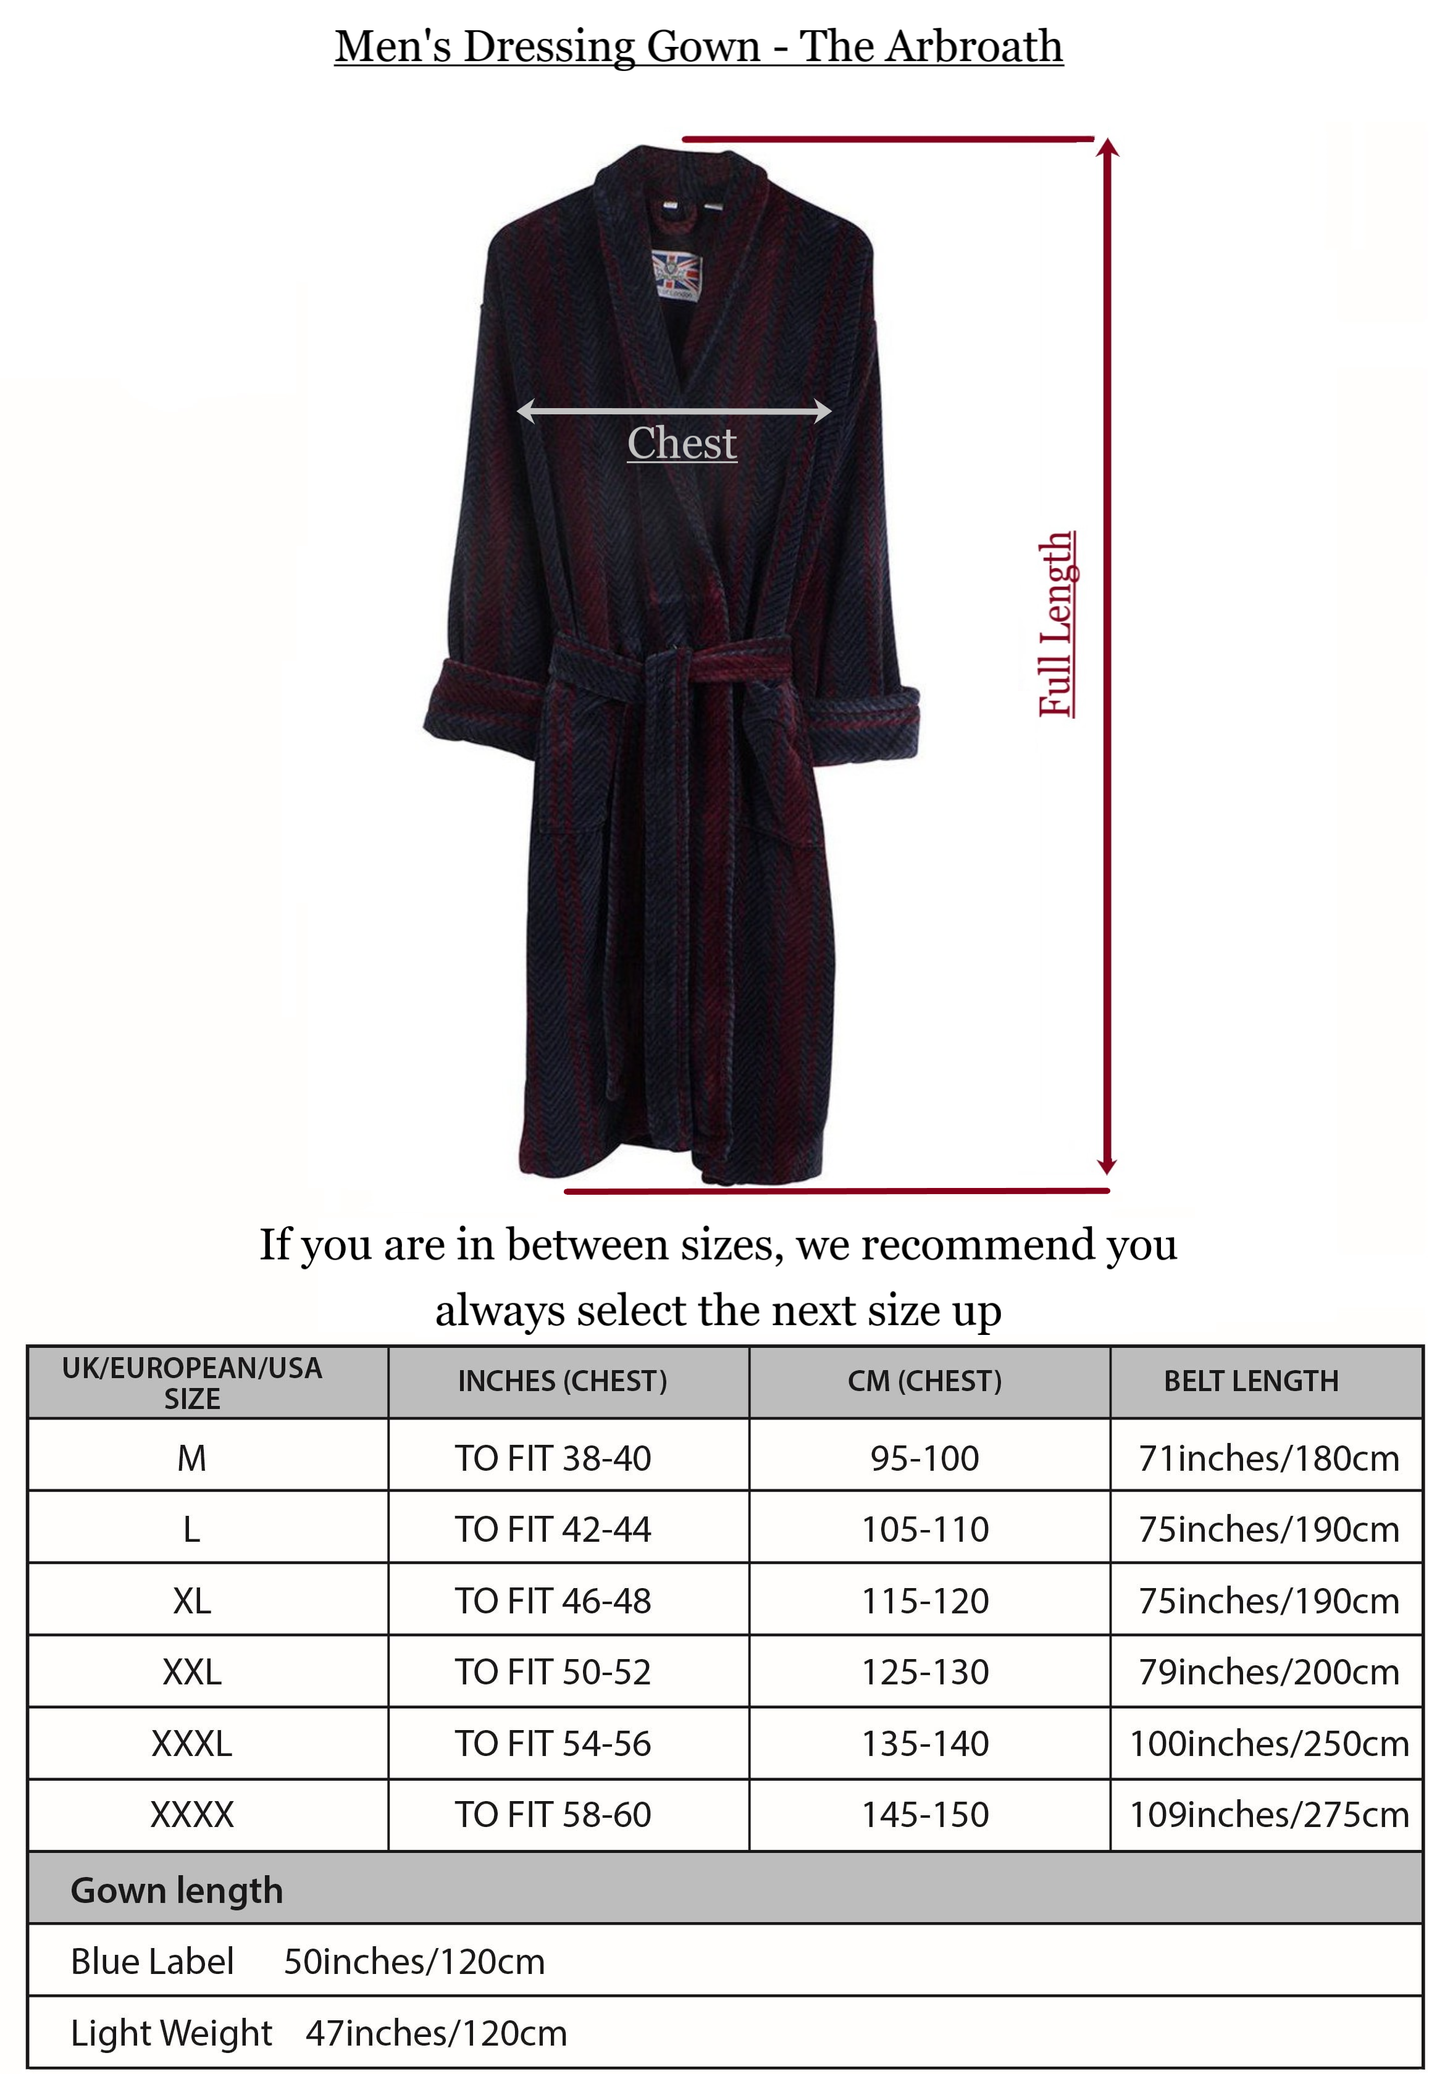 Men's robes - The Arbroath